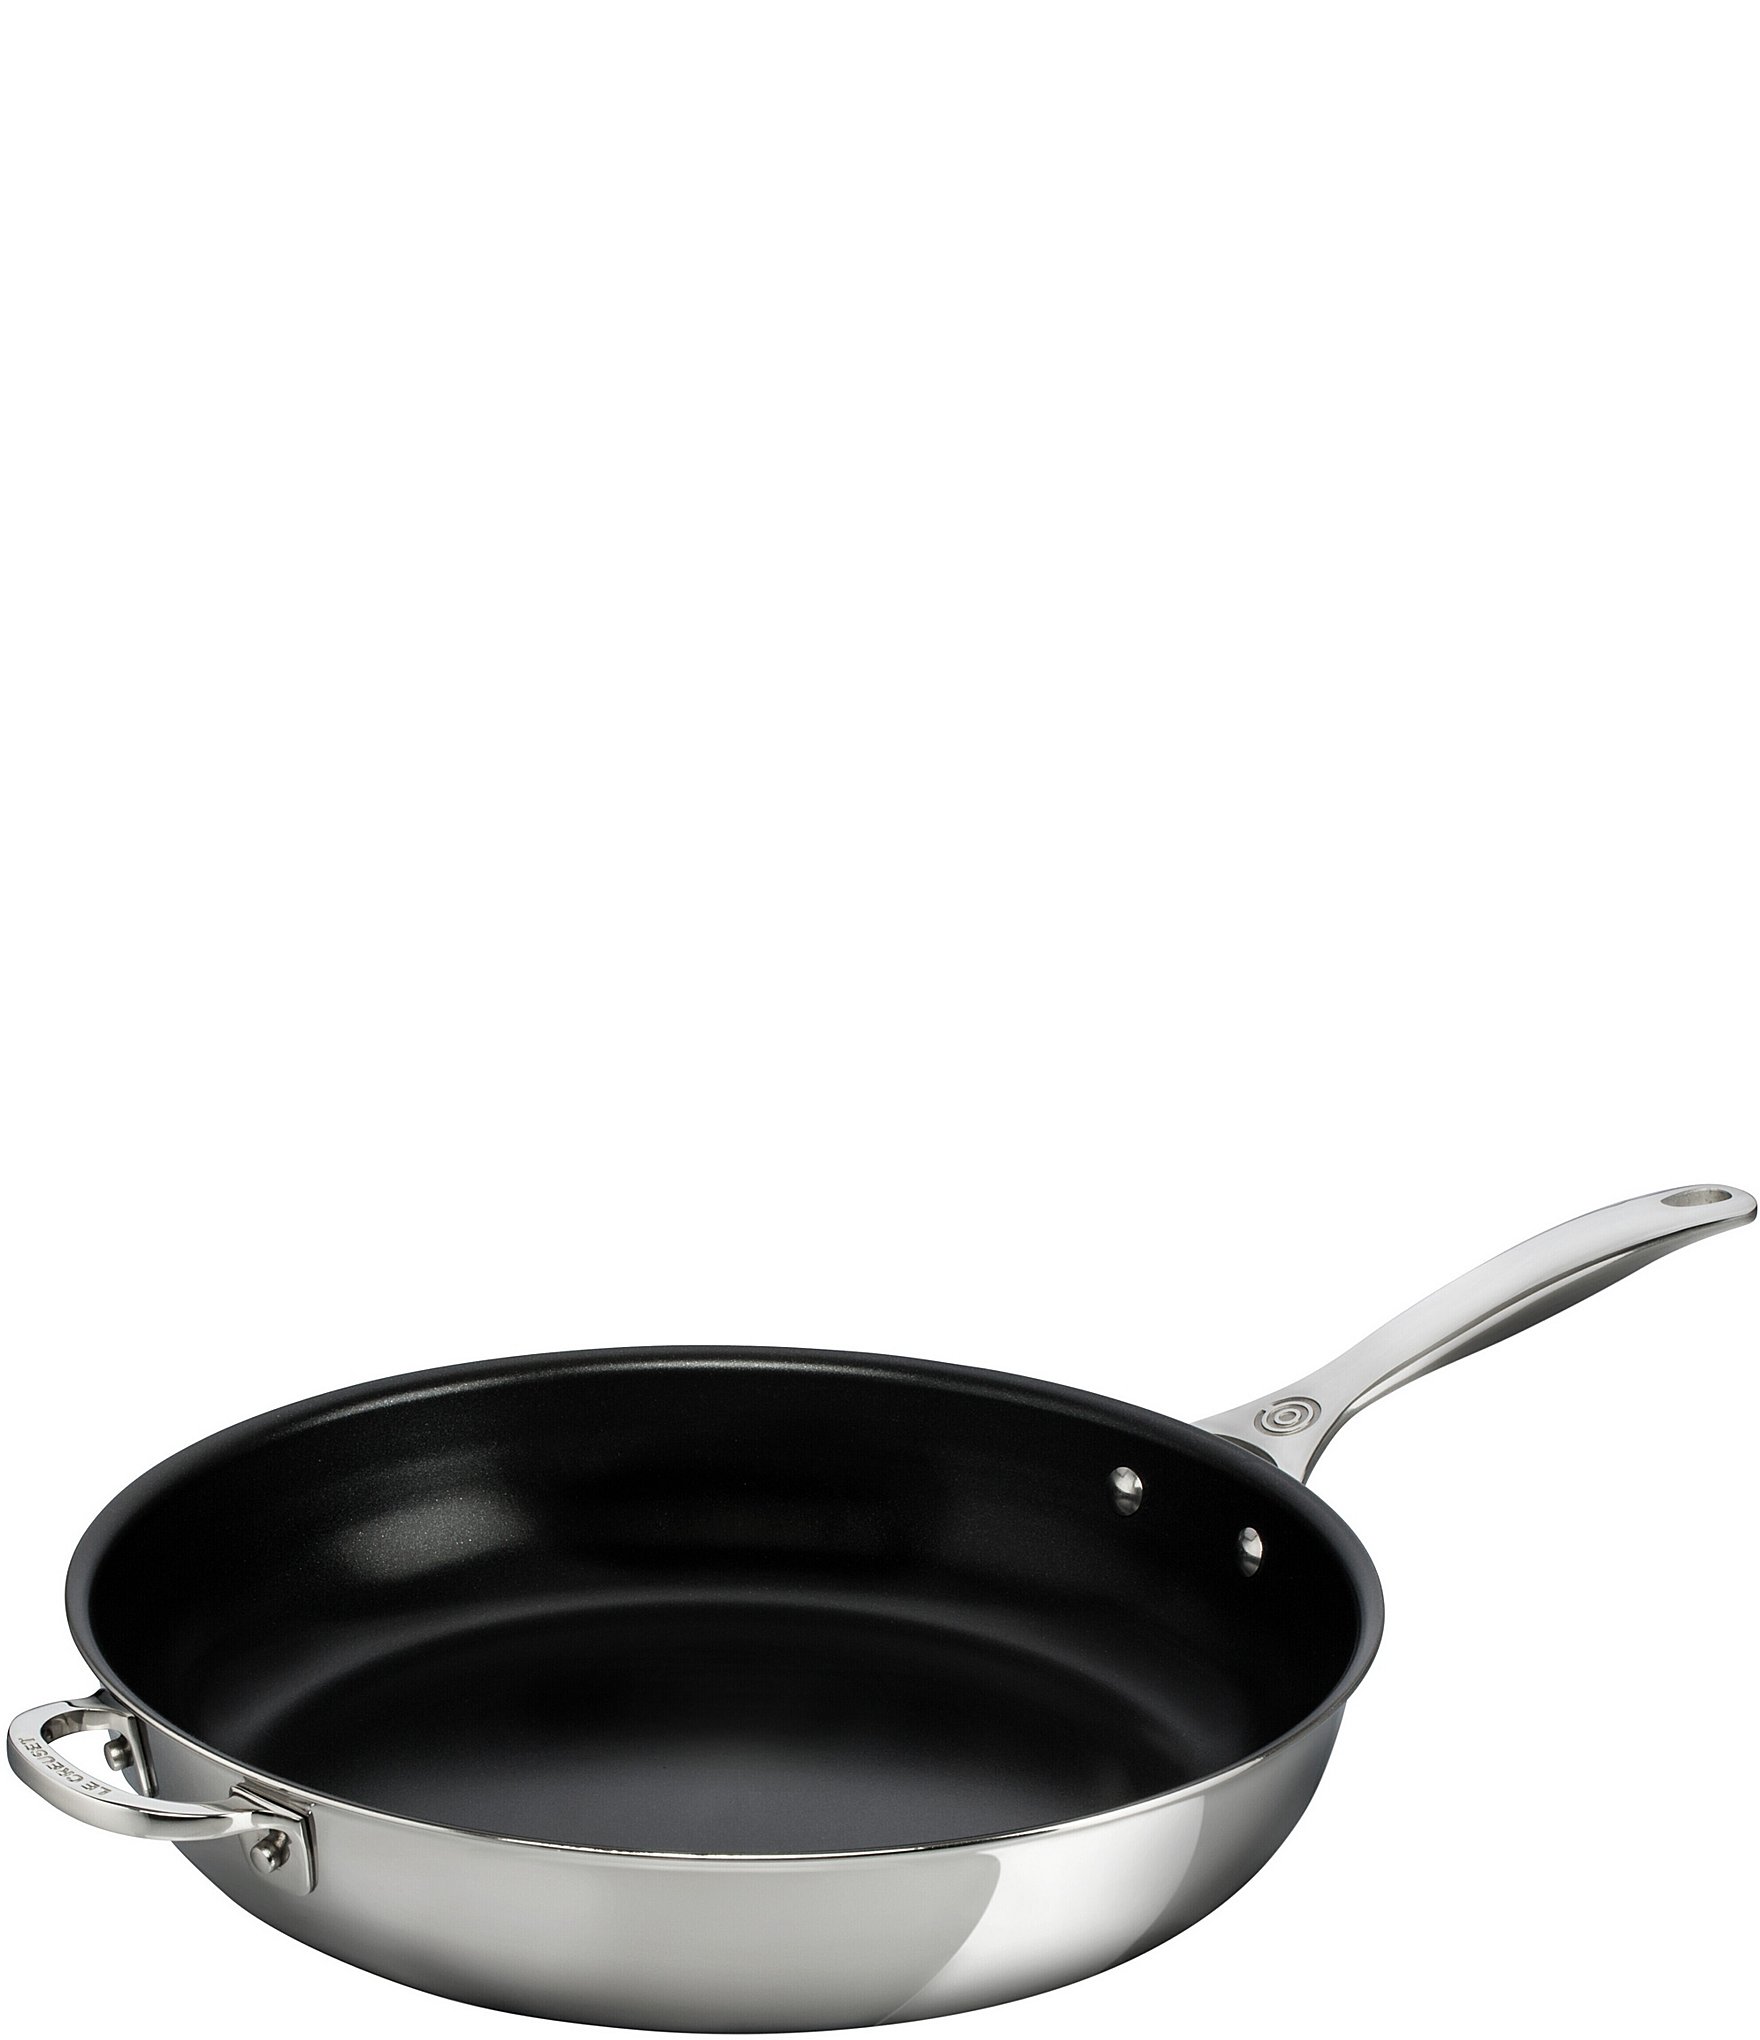 Le Creuset Stainless Steel Fry Pan 12-Inch - Fante's Kitchen Shop